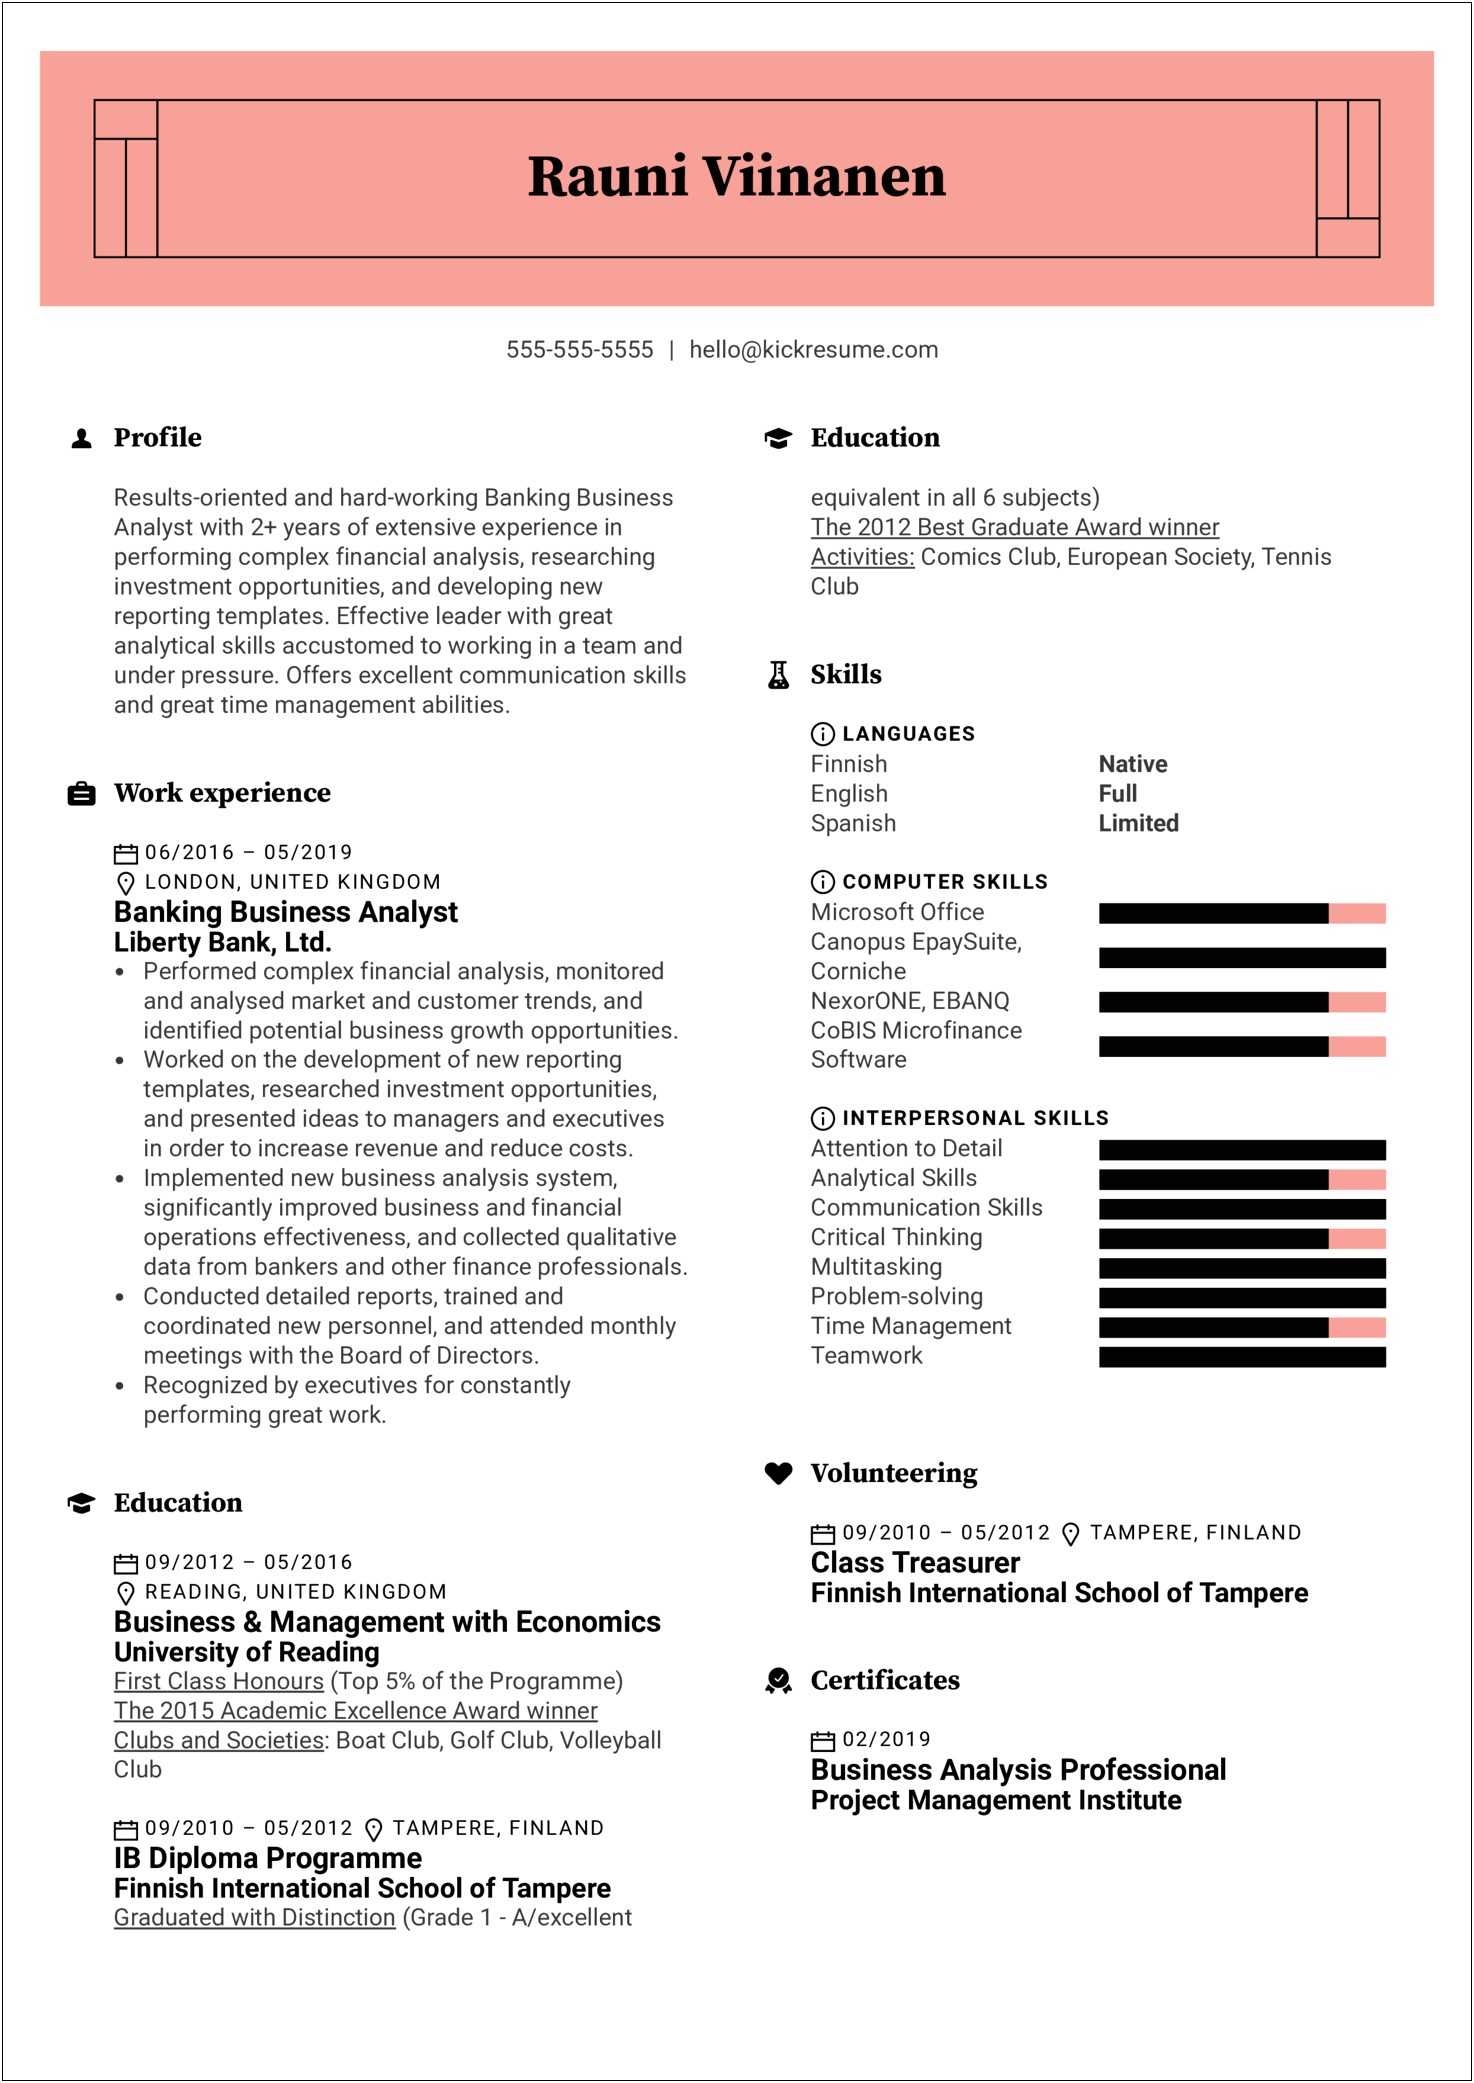 Sample Resume Of A Bank Auditor